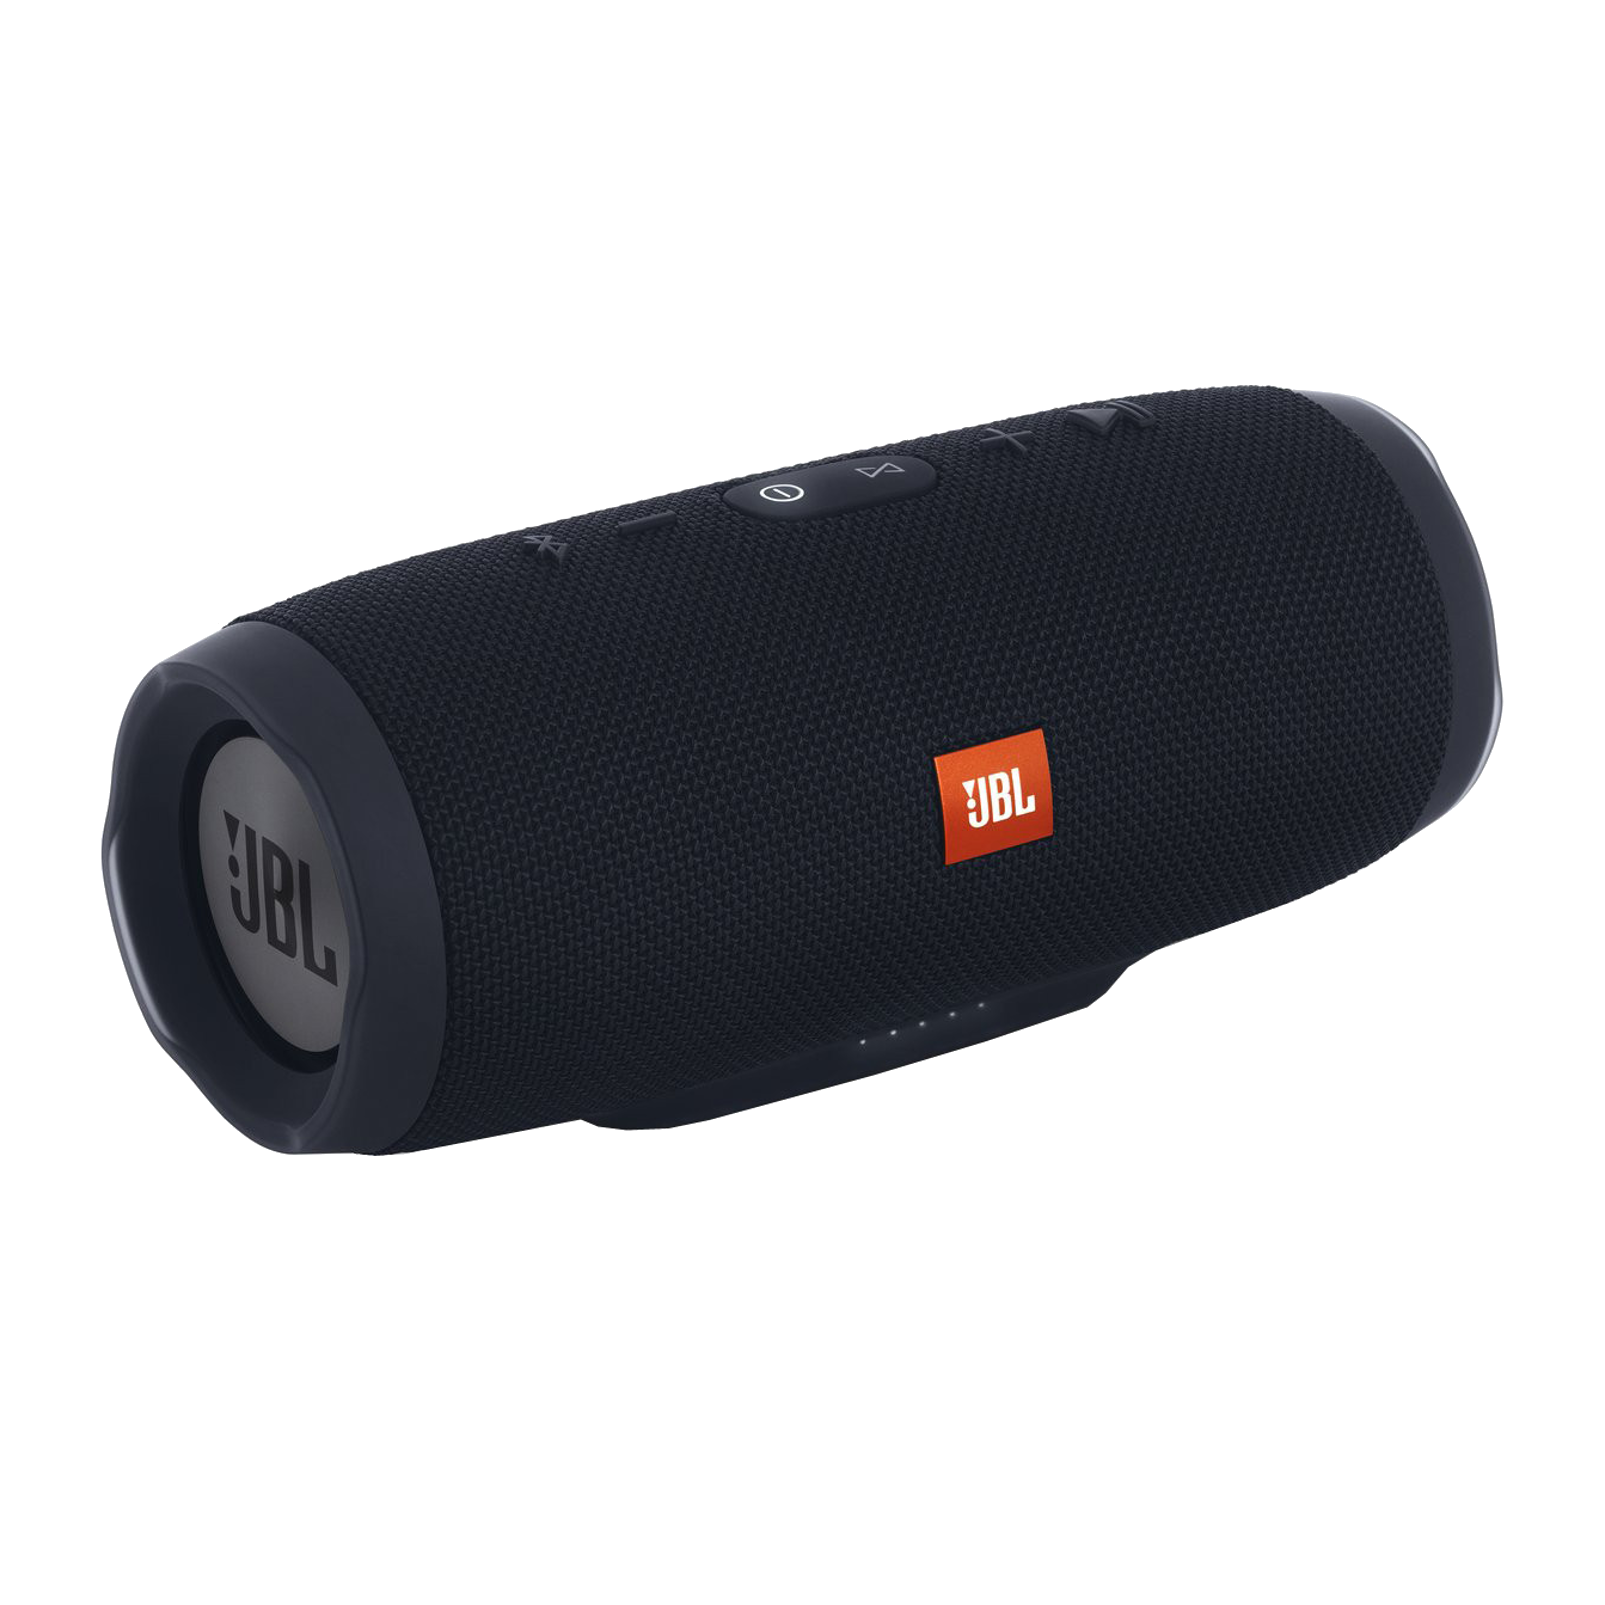 JBL Charge 3 Stealth Edition | Full-featured waterproof portable speaker with high-capacity battery to charge your